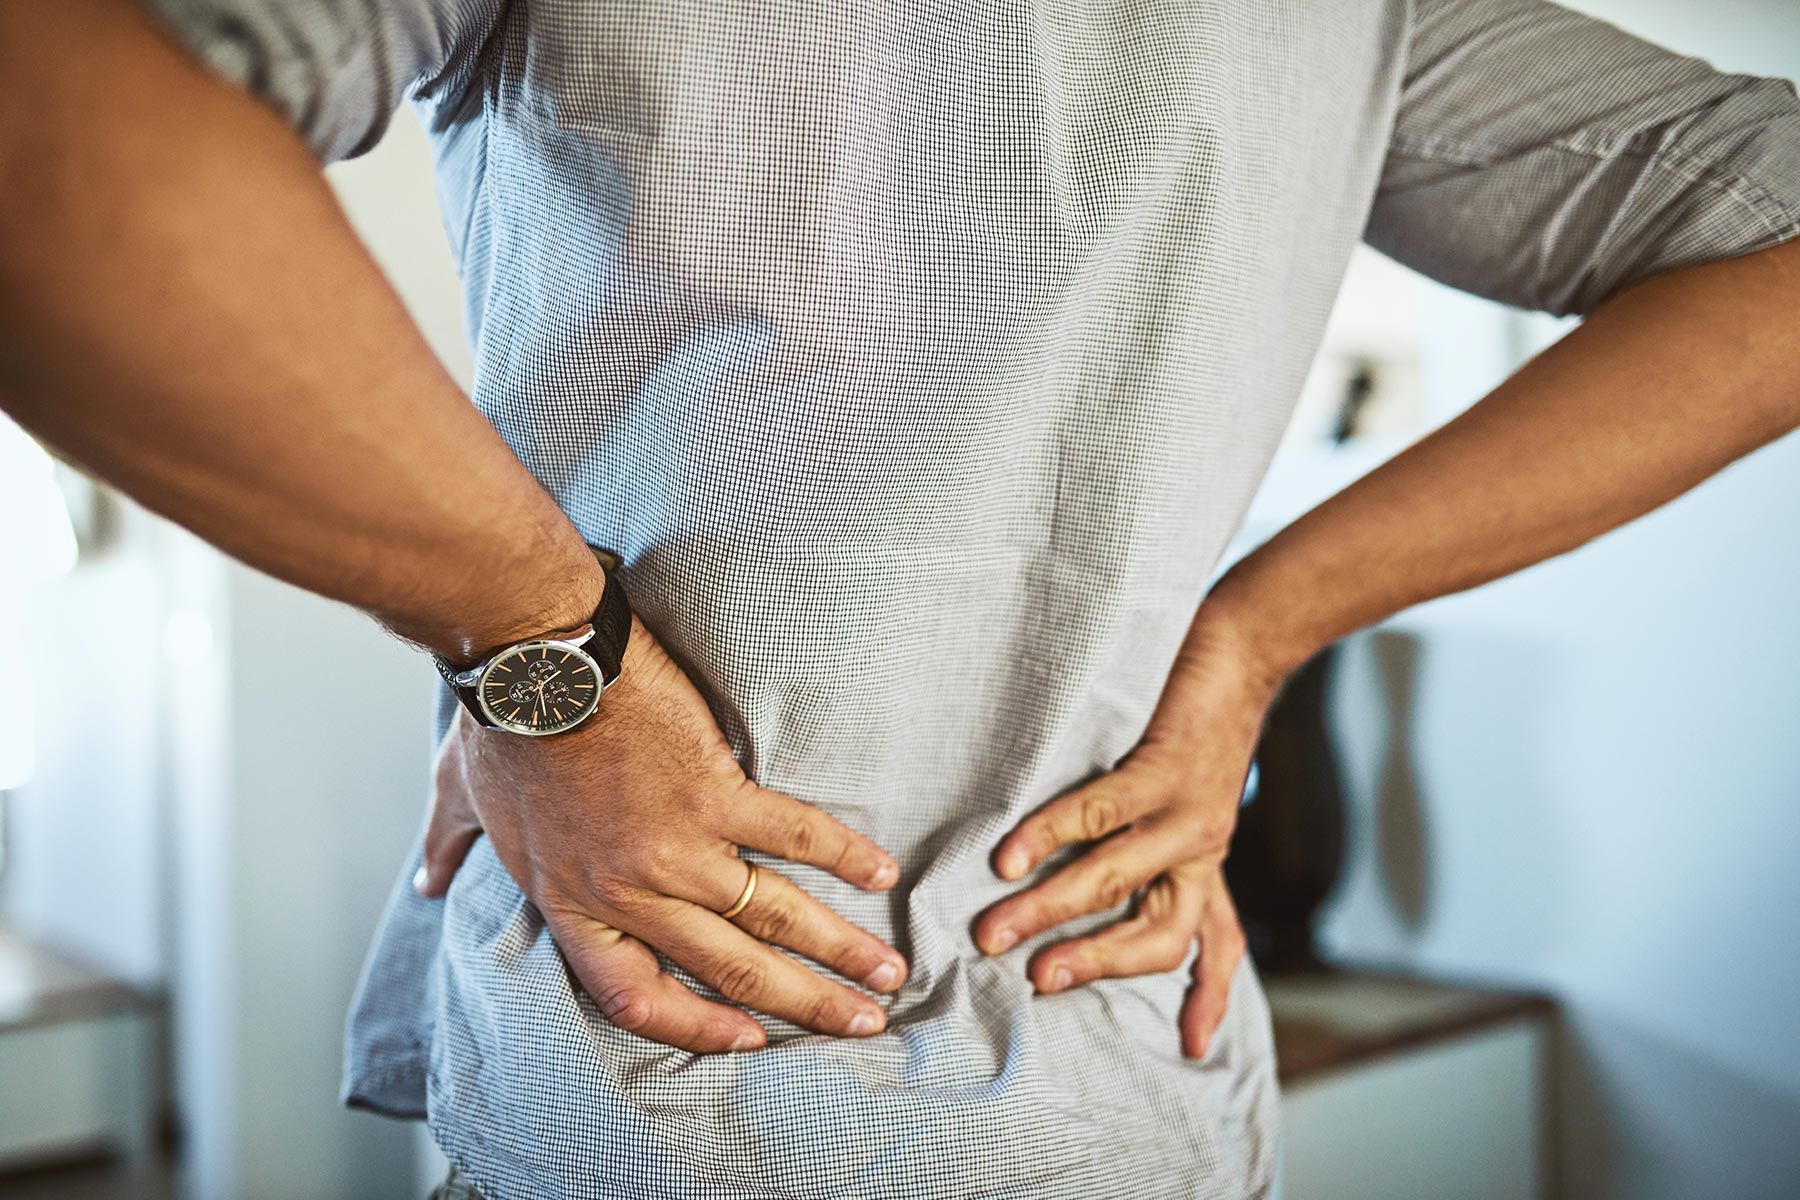 How to ease back pain at home fast